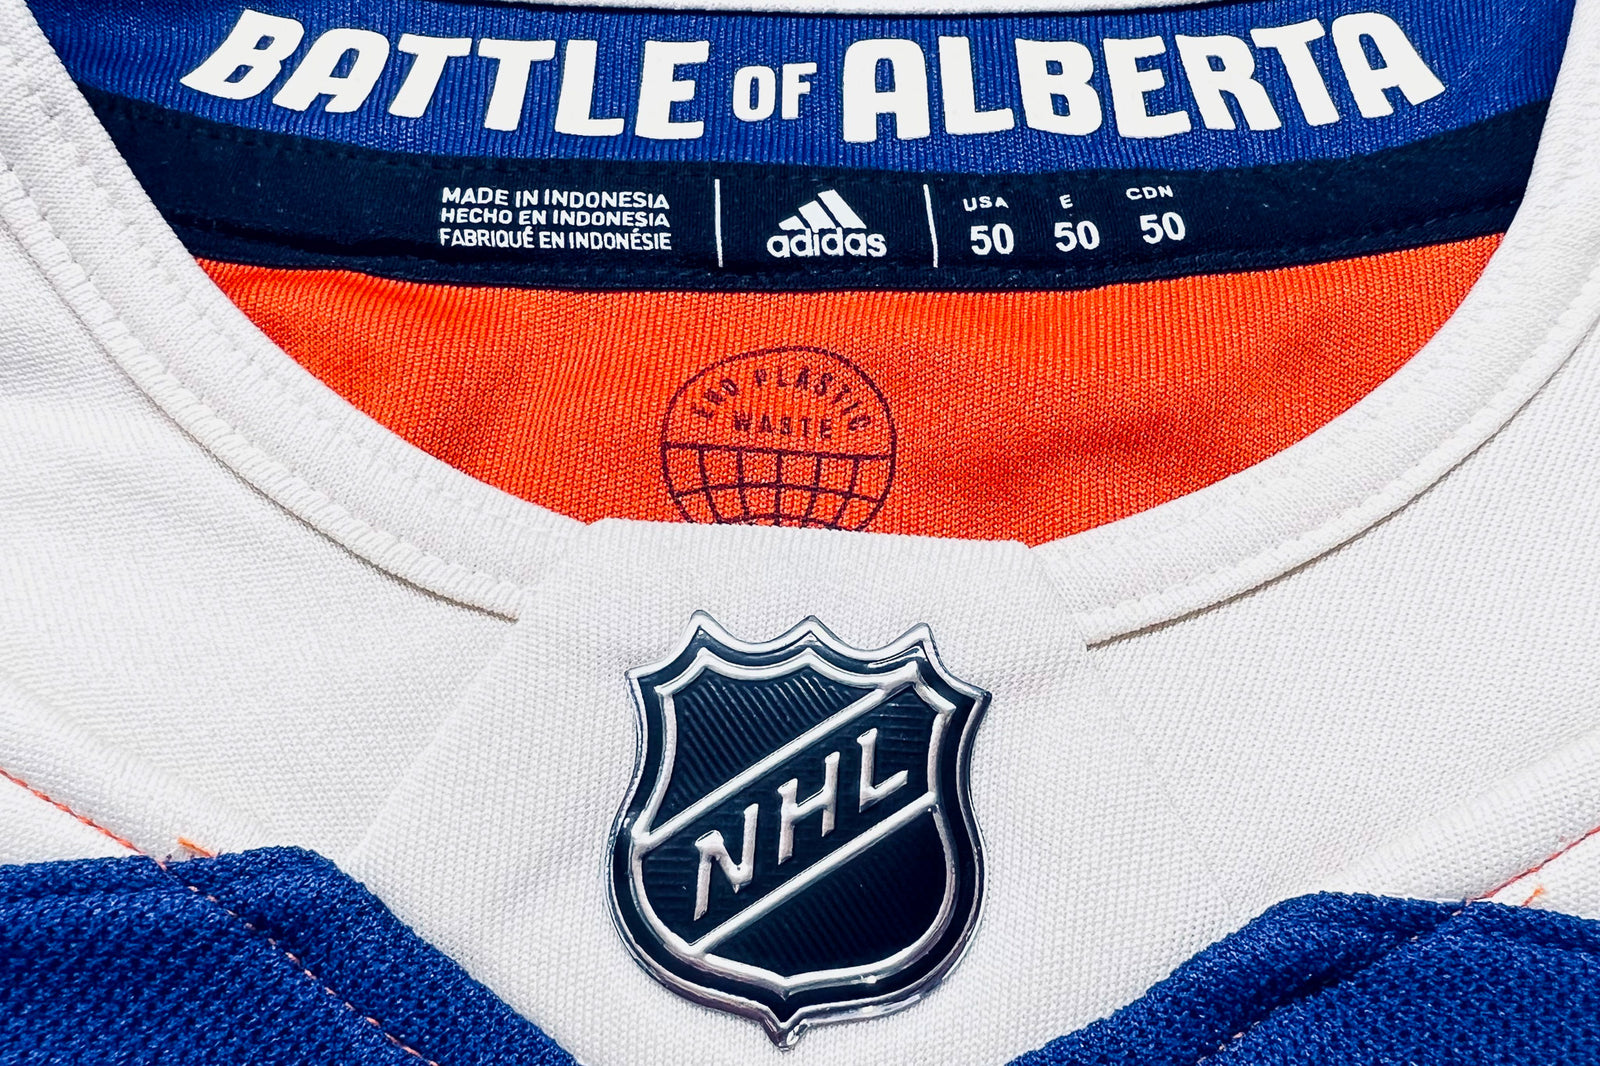 The Calgary Flames and Edmonton Oilers release 2023 Heritage Classic jerseys  - The Win Column